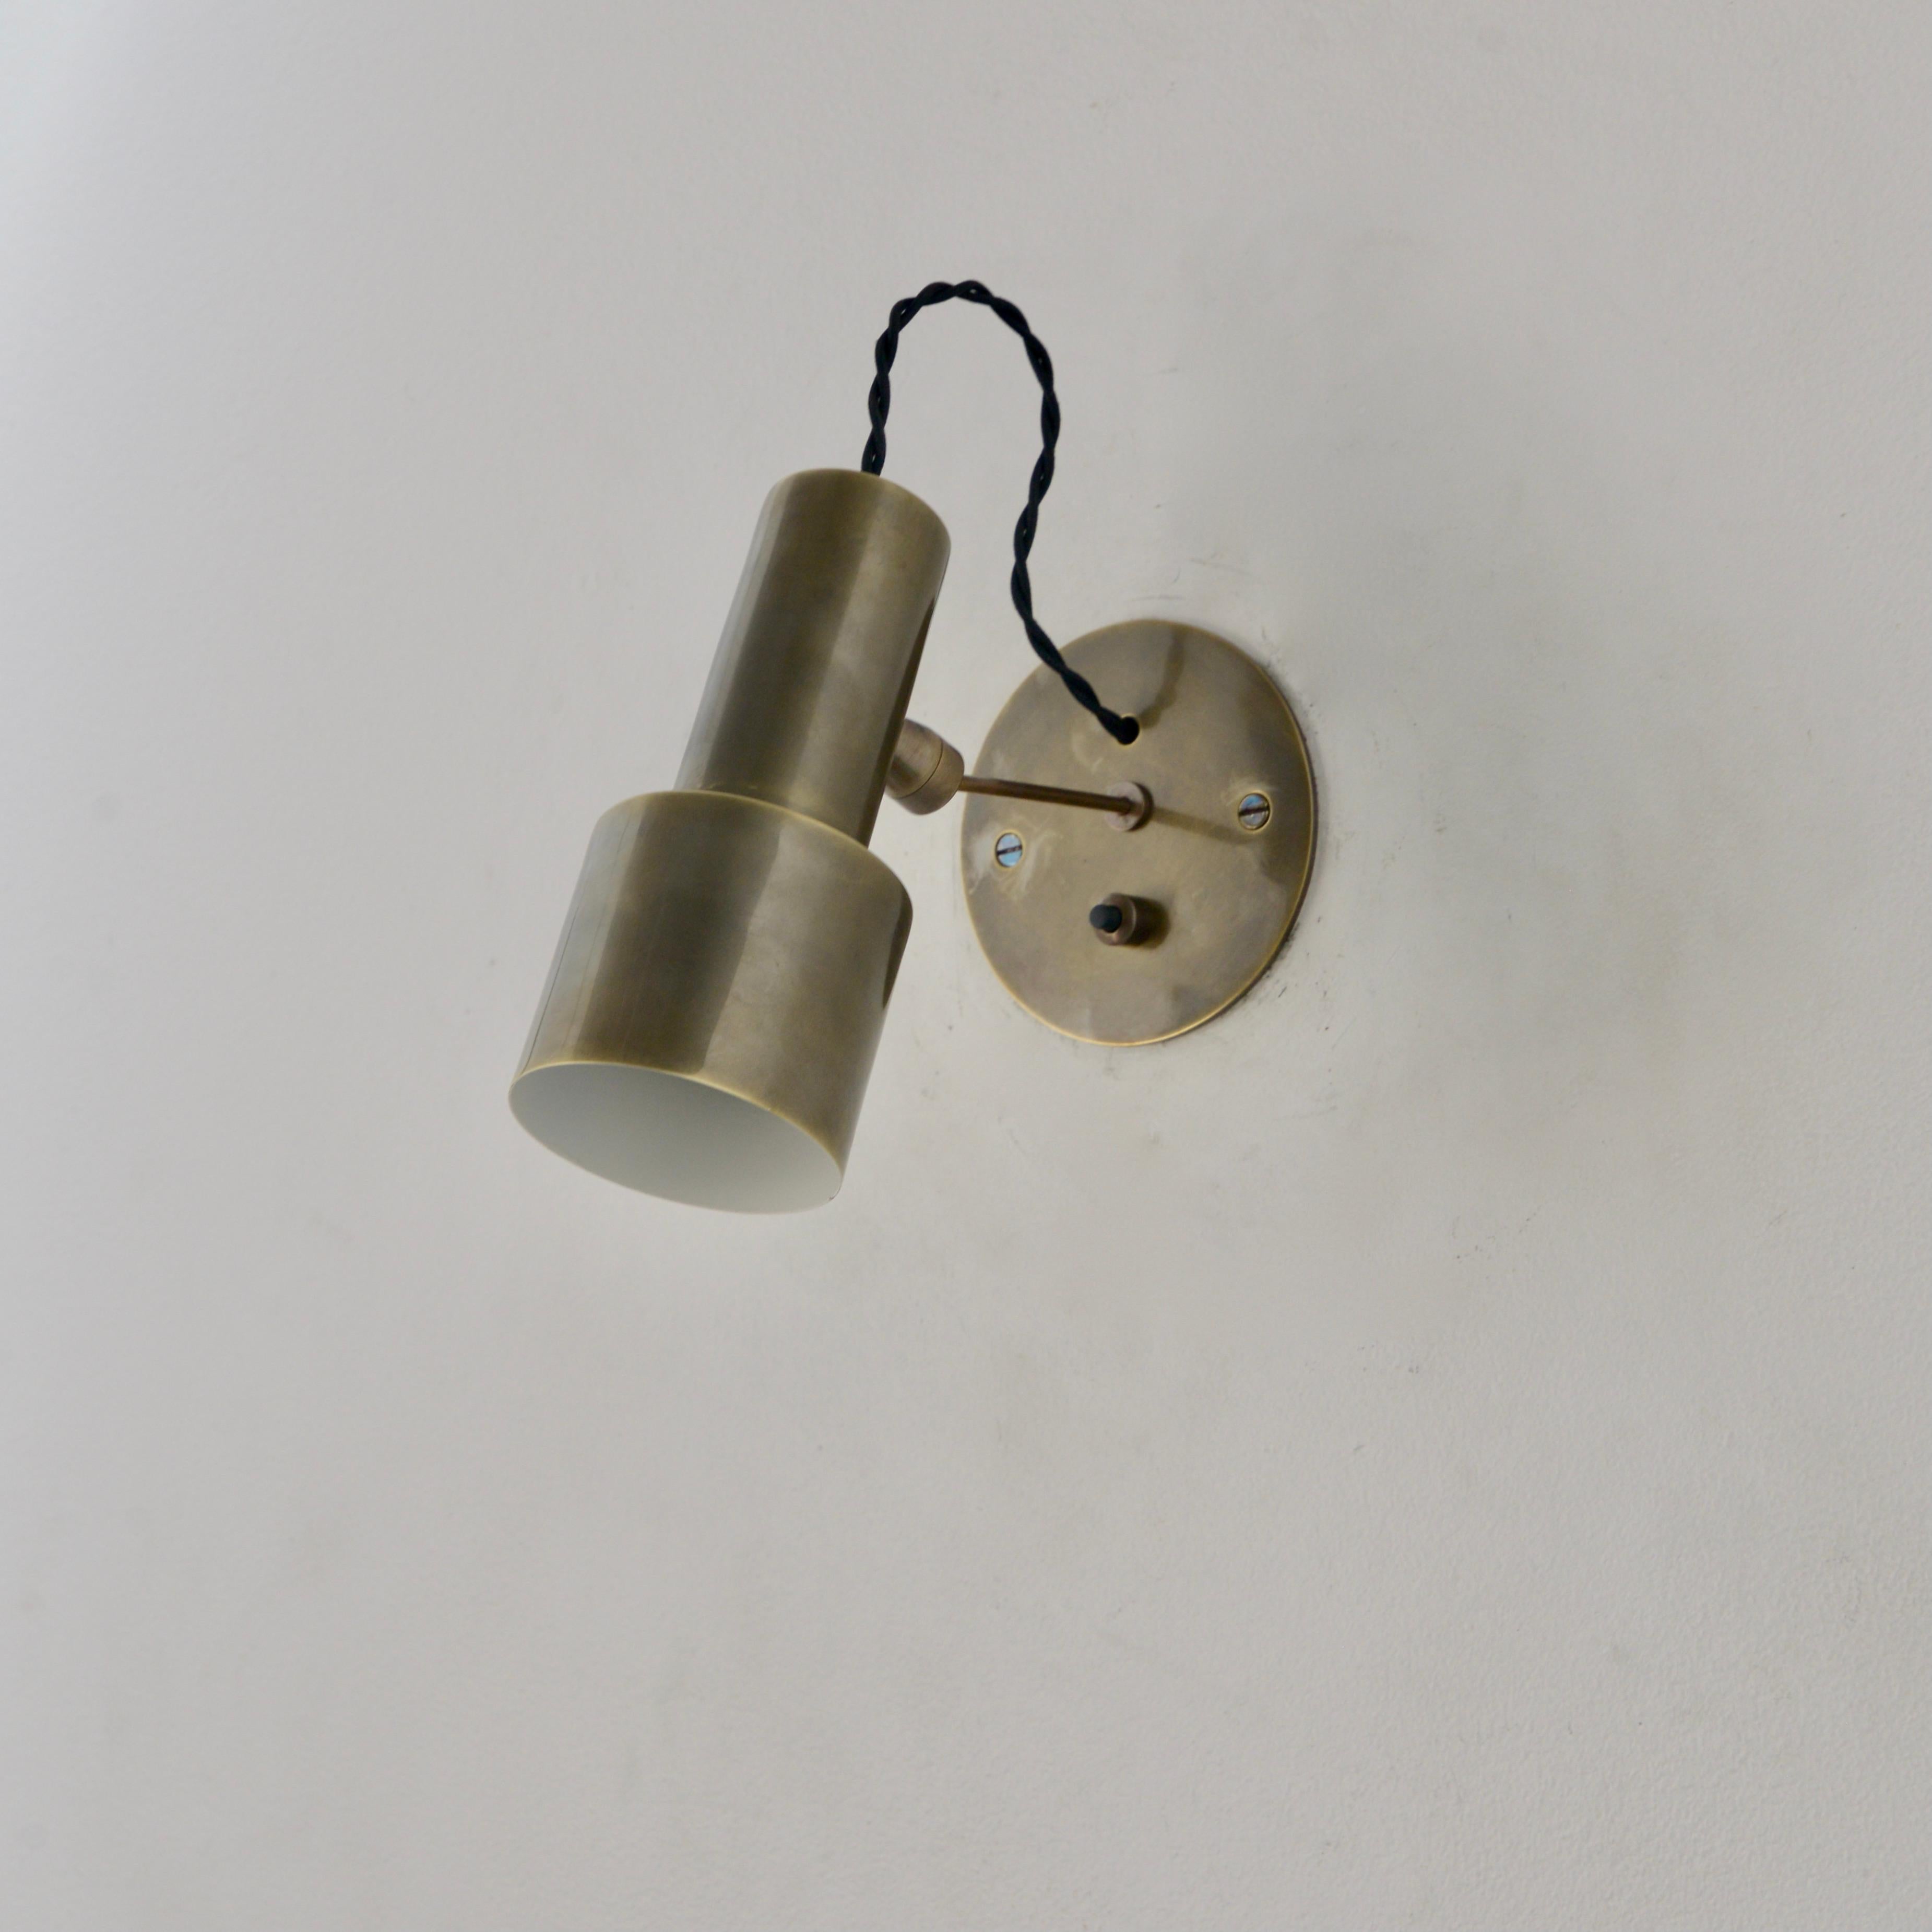 Beautiful patinated brass MicroLU articulating wall sconce by Lumfardo Luminaires. Made contemporary in the US. In all brass patinated finish with push switch. Multiples available for order. Can be wired for use anywhere in the world. Lightbulb